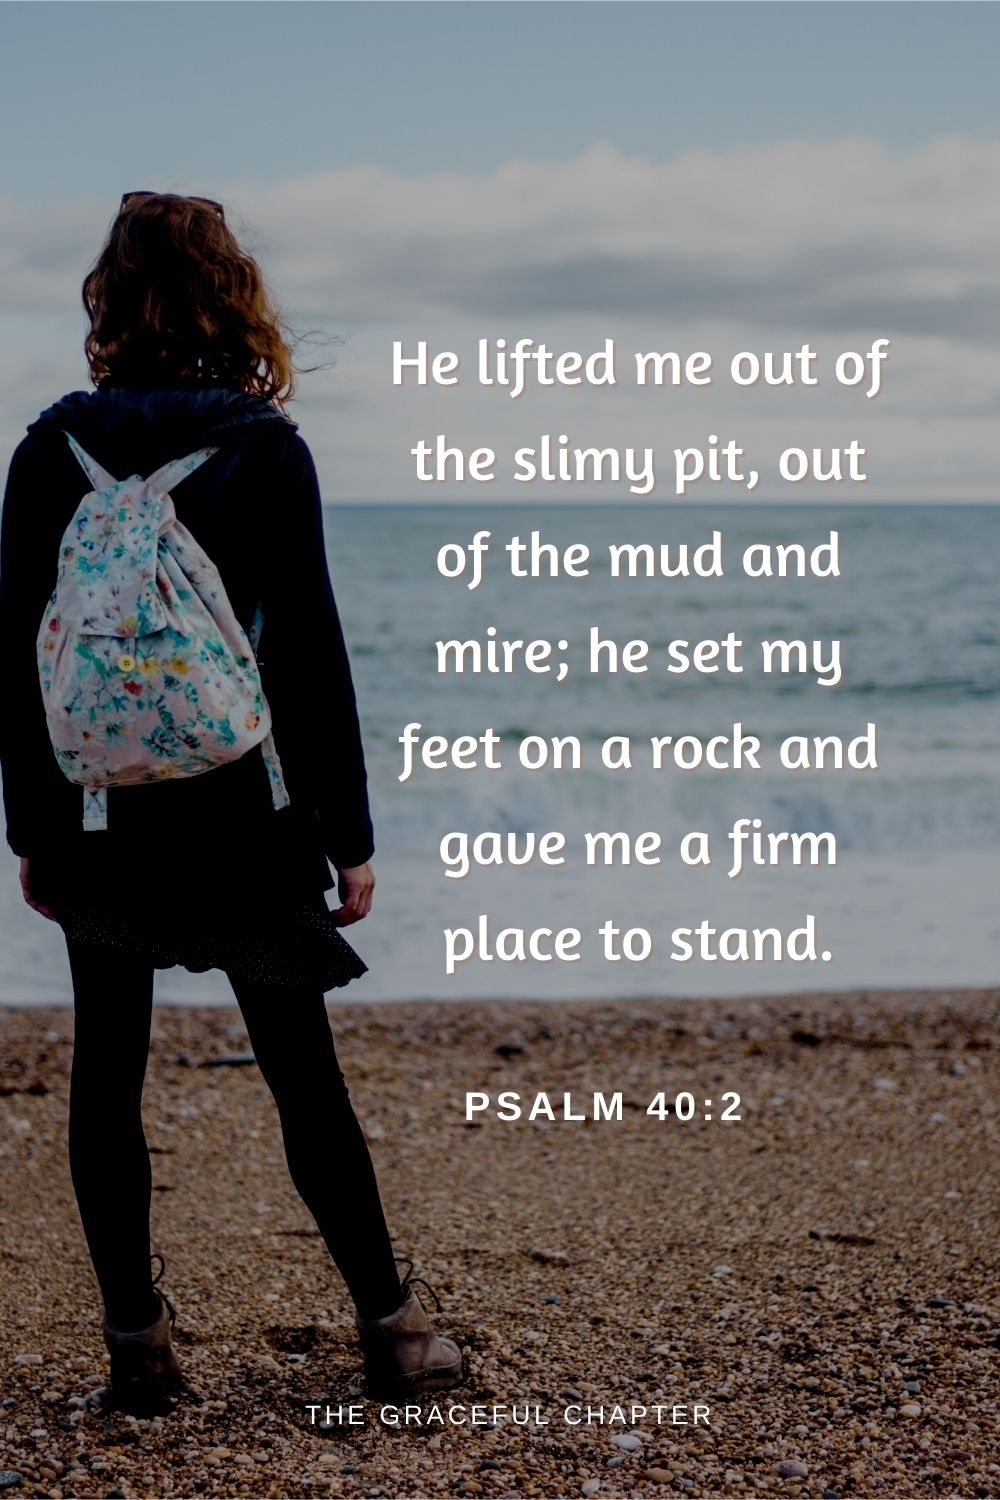 He lifted me out of the slimy pit, out of the mud and mire; he set my feet on a rock and gave me a firm place to stand.